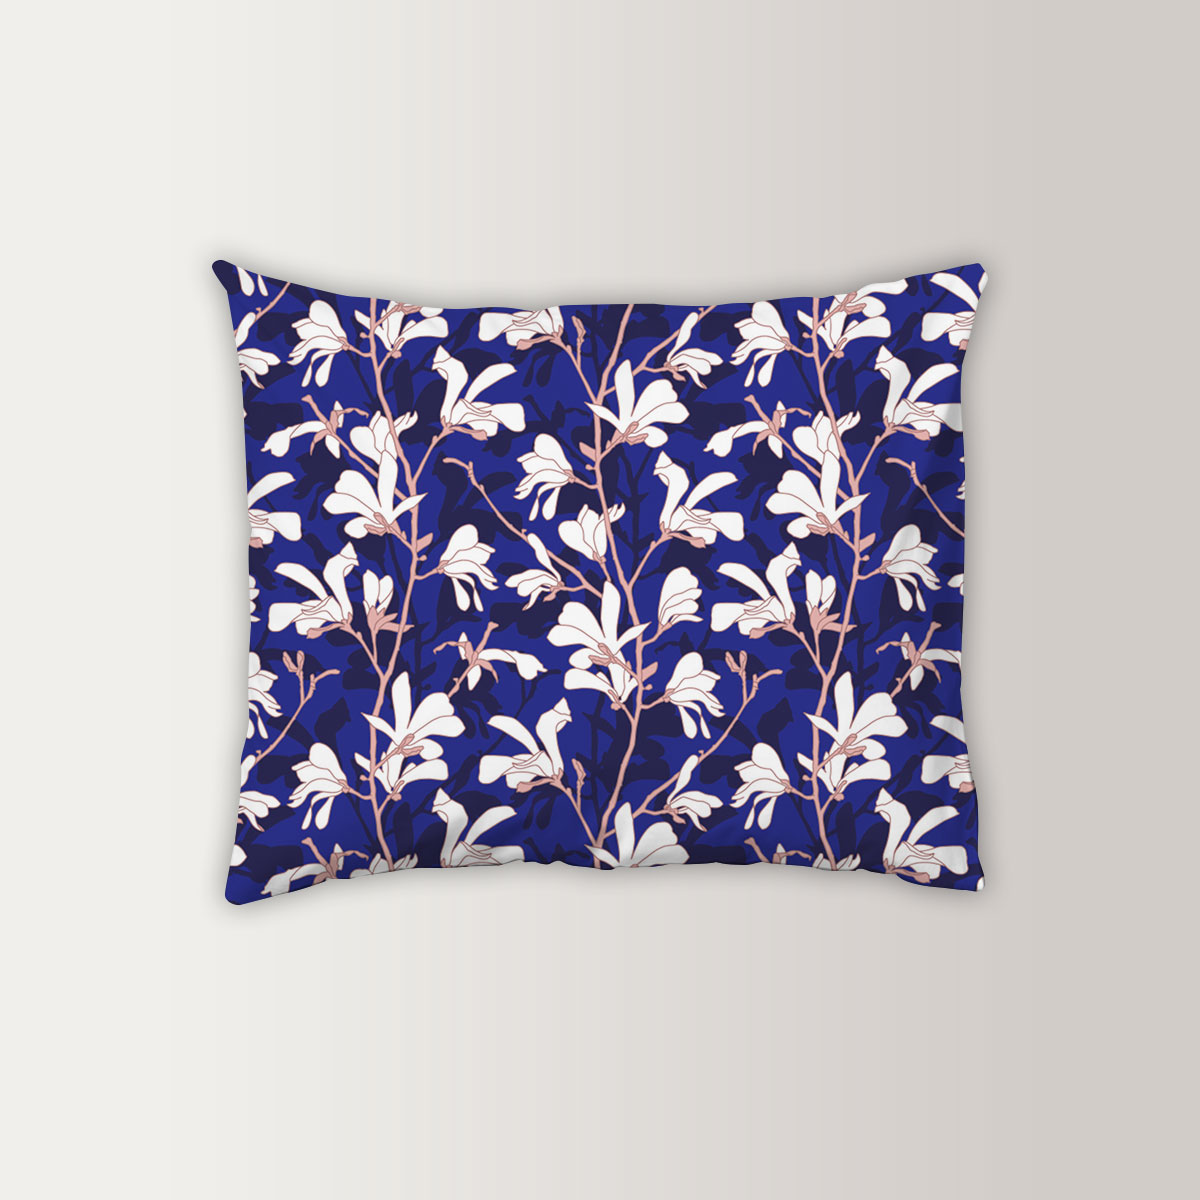 Blue Floral Background With White Magnolia Flower Pillow Case